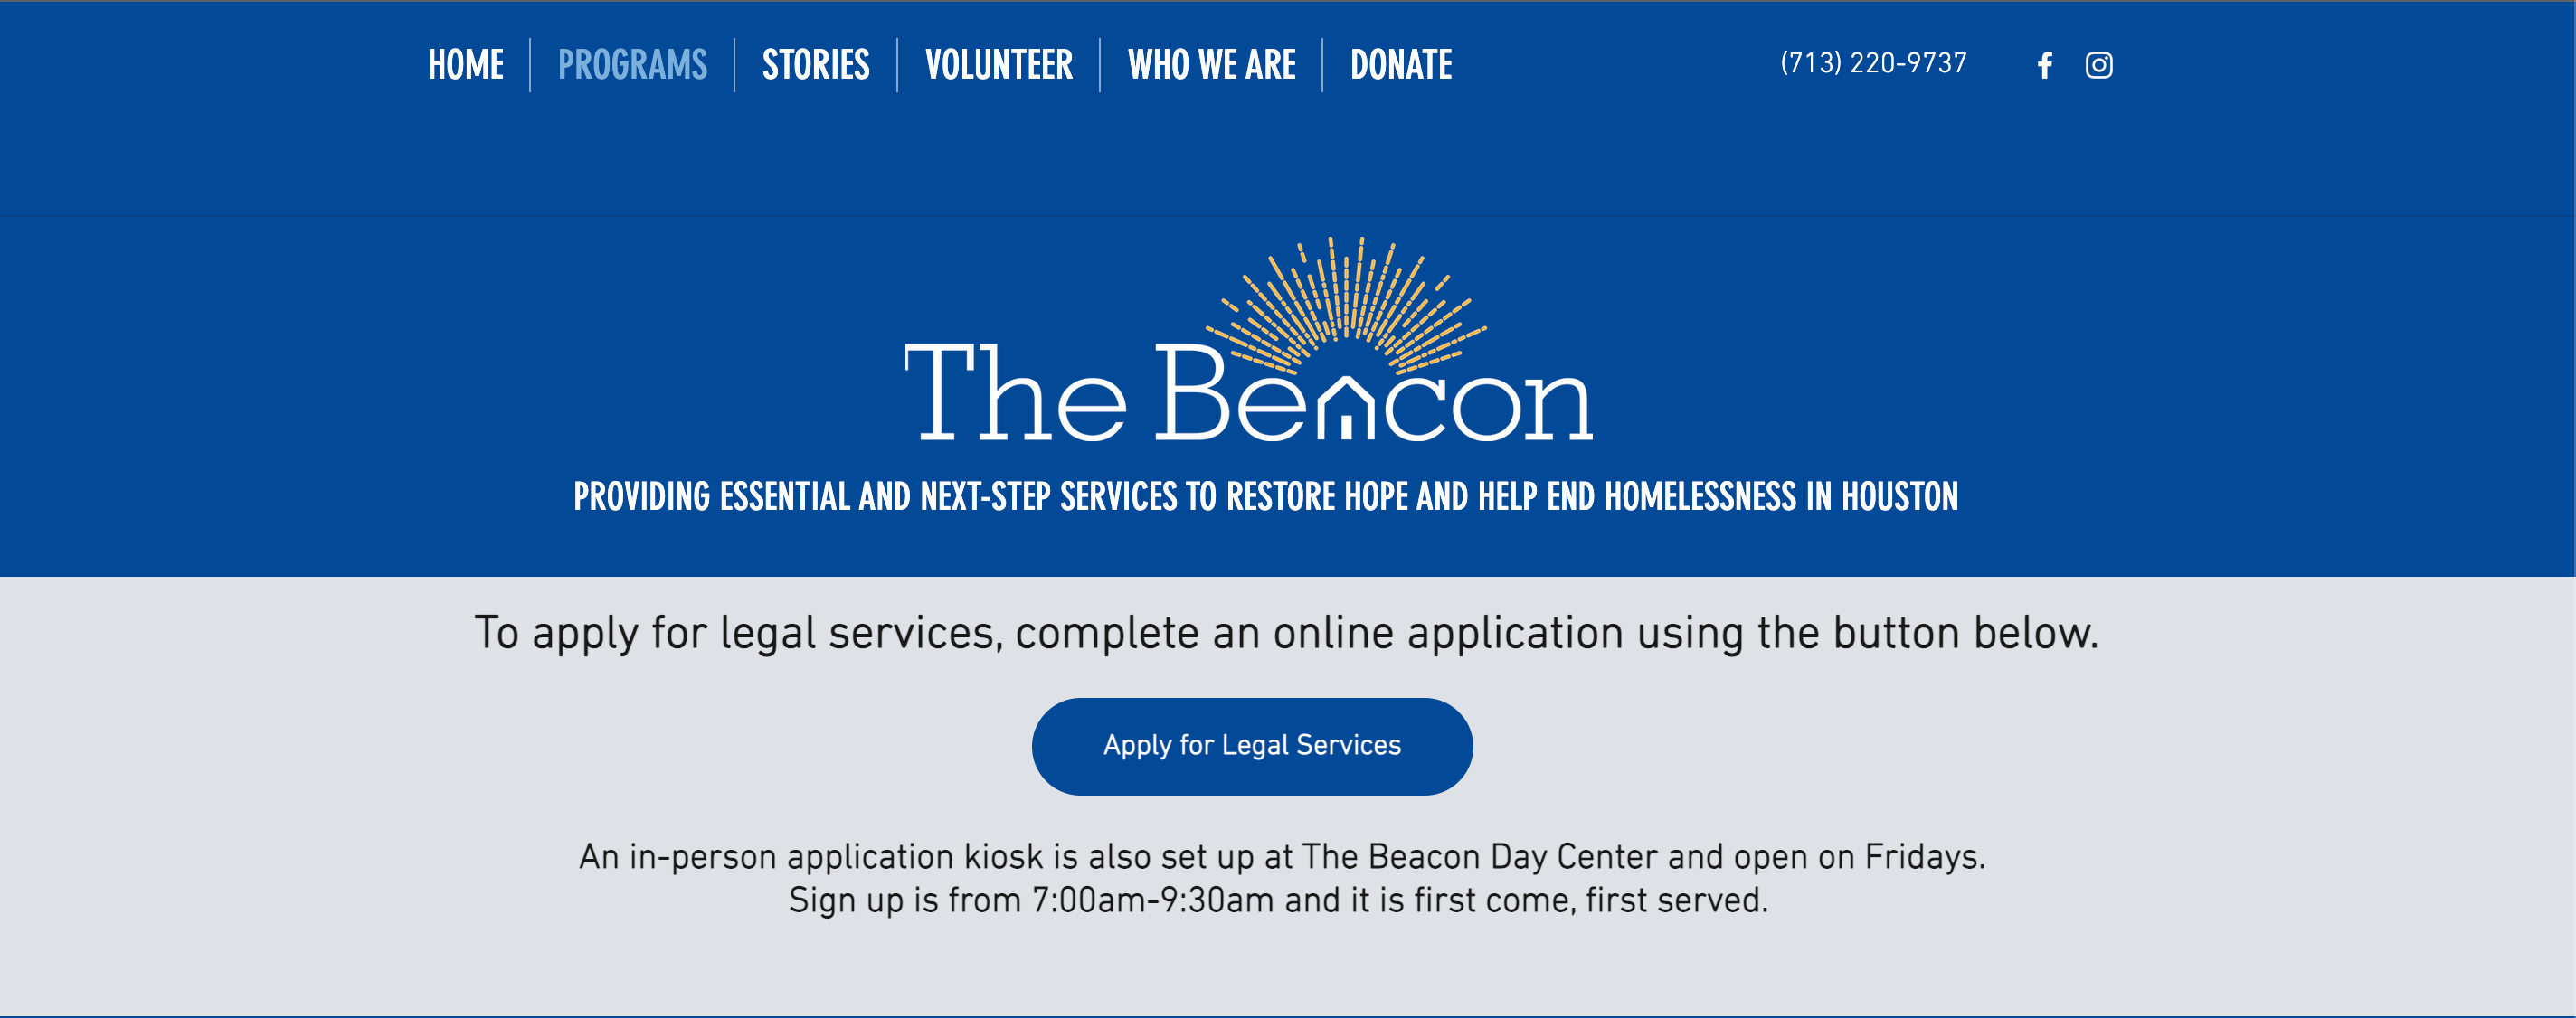 Beacon Law's homepage. The design is simple and intuitive.